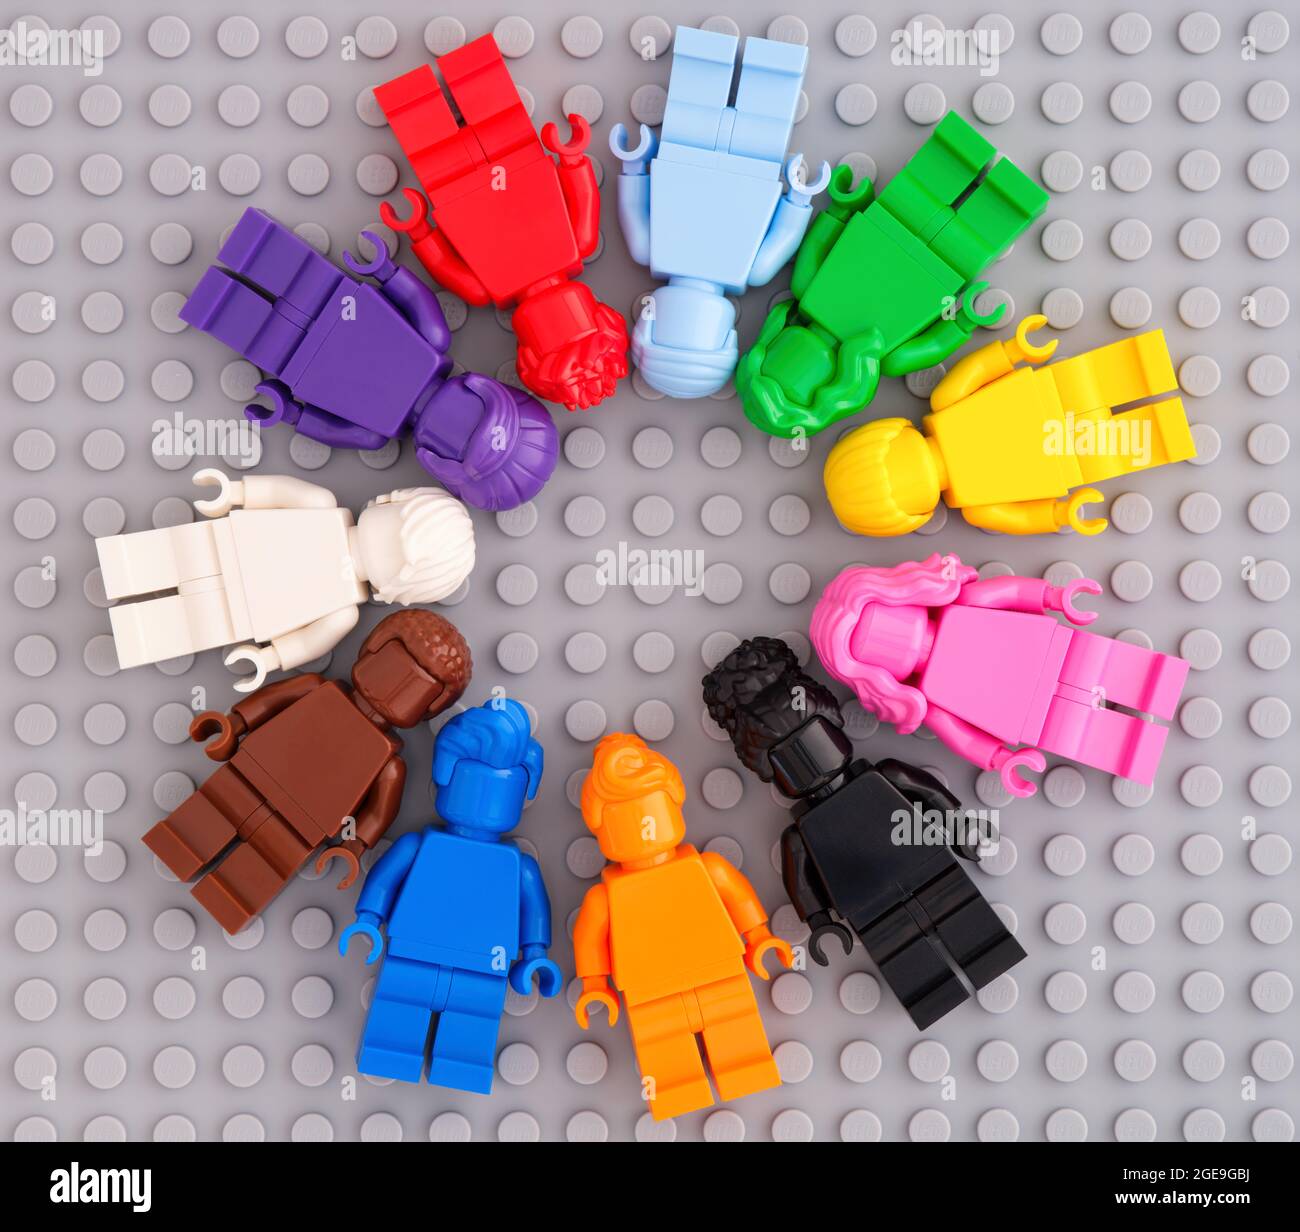 Tambov, Russian Federation -August 12, 2021 Eleven monochrome Lego  minifigures on gray baseplate background. Lego Everyone is Awesome set  Stock Photo - Alamy